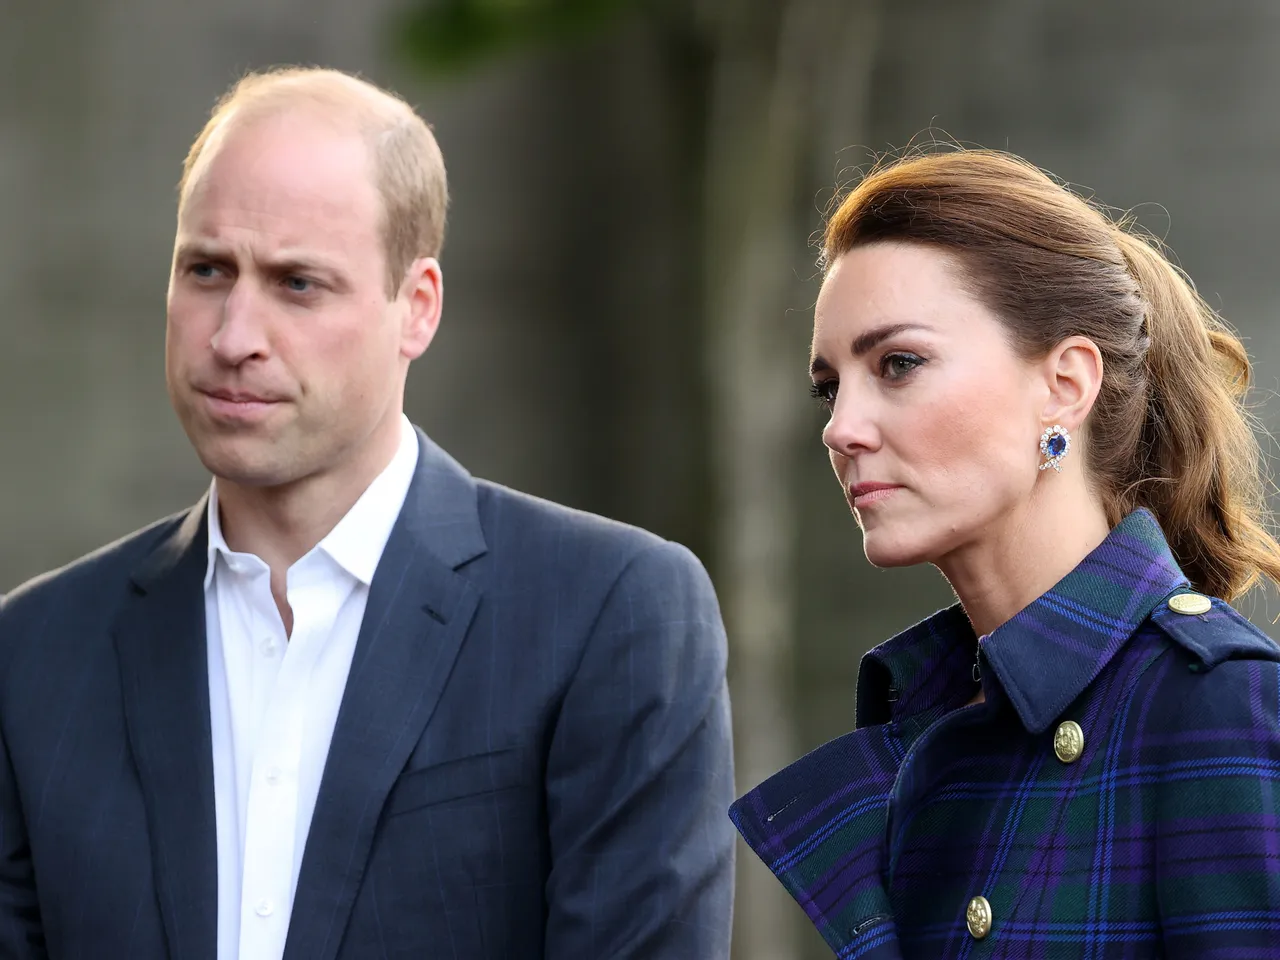 New video of Kate Middleton and Prince William released